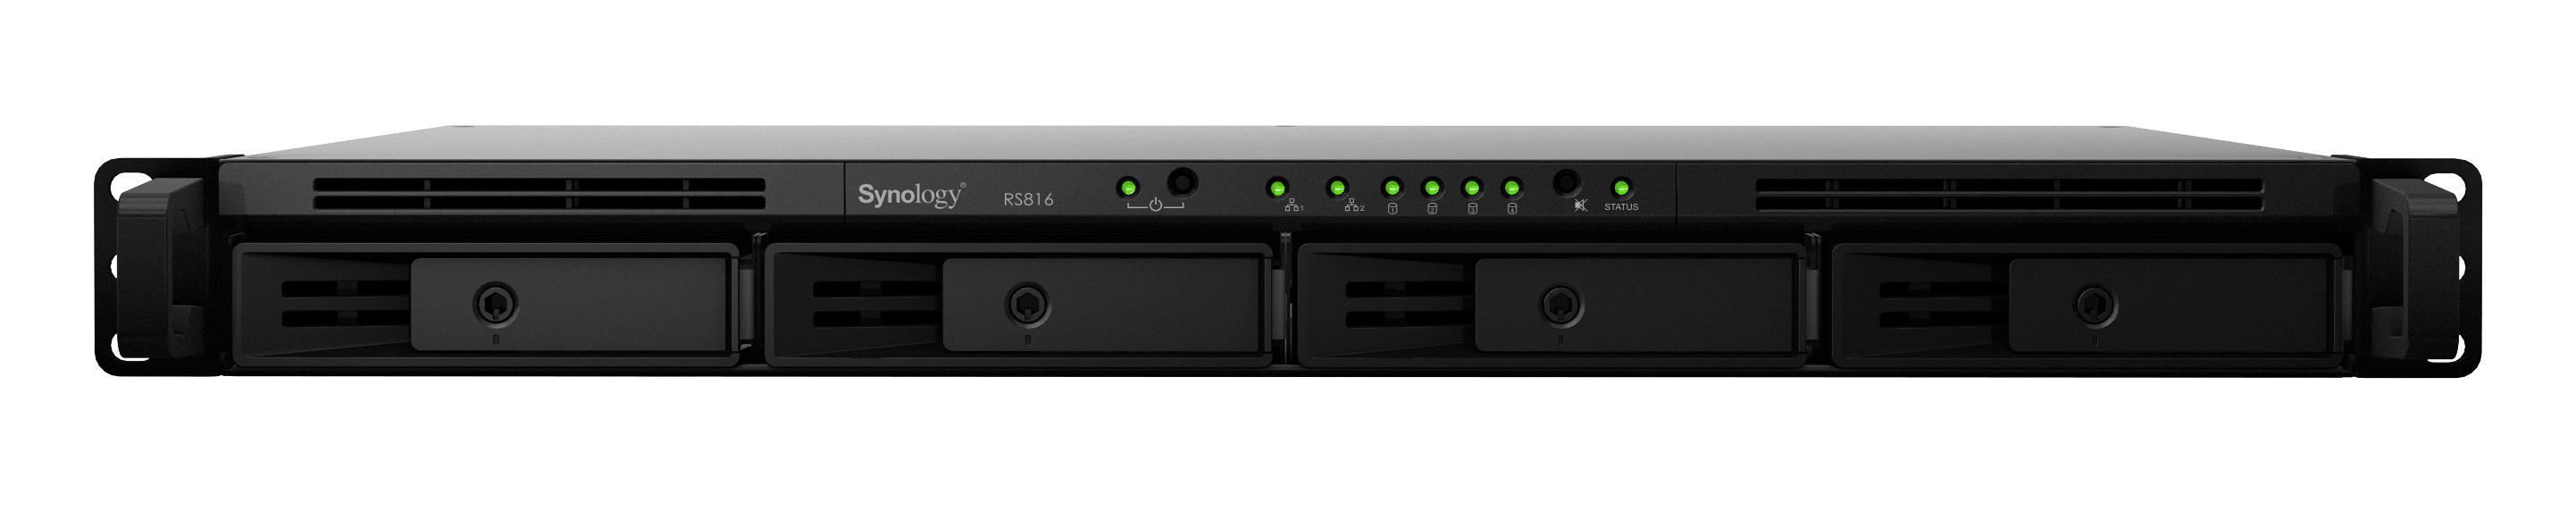 Synology_RS816_frontal